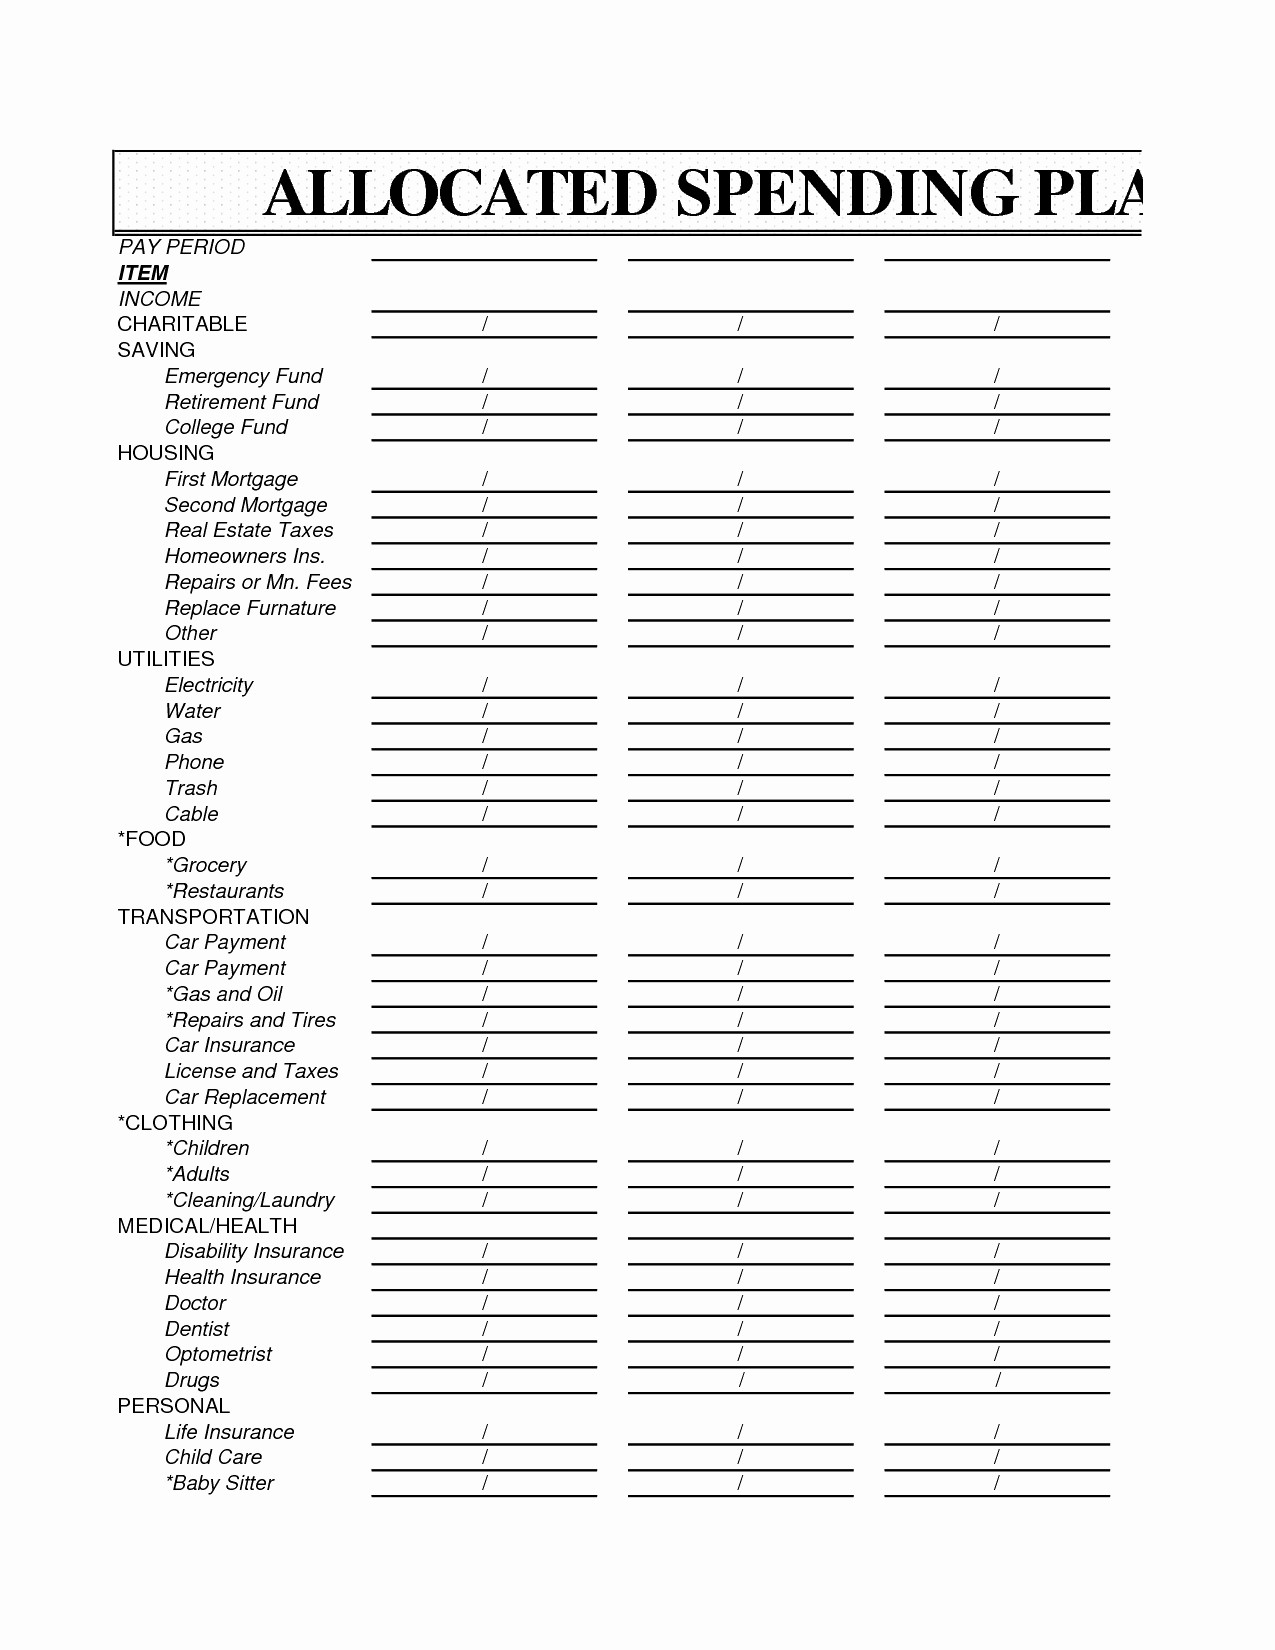 50 New Dave Ramsey Allocated Spending Plan Pdf DOCUMENTS IDEAS